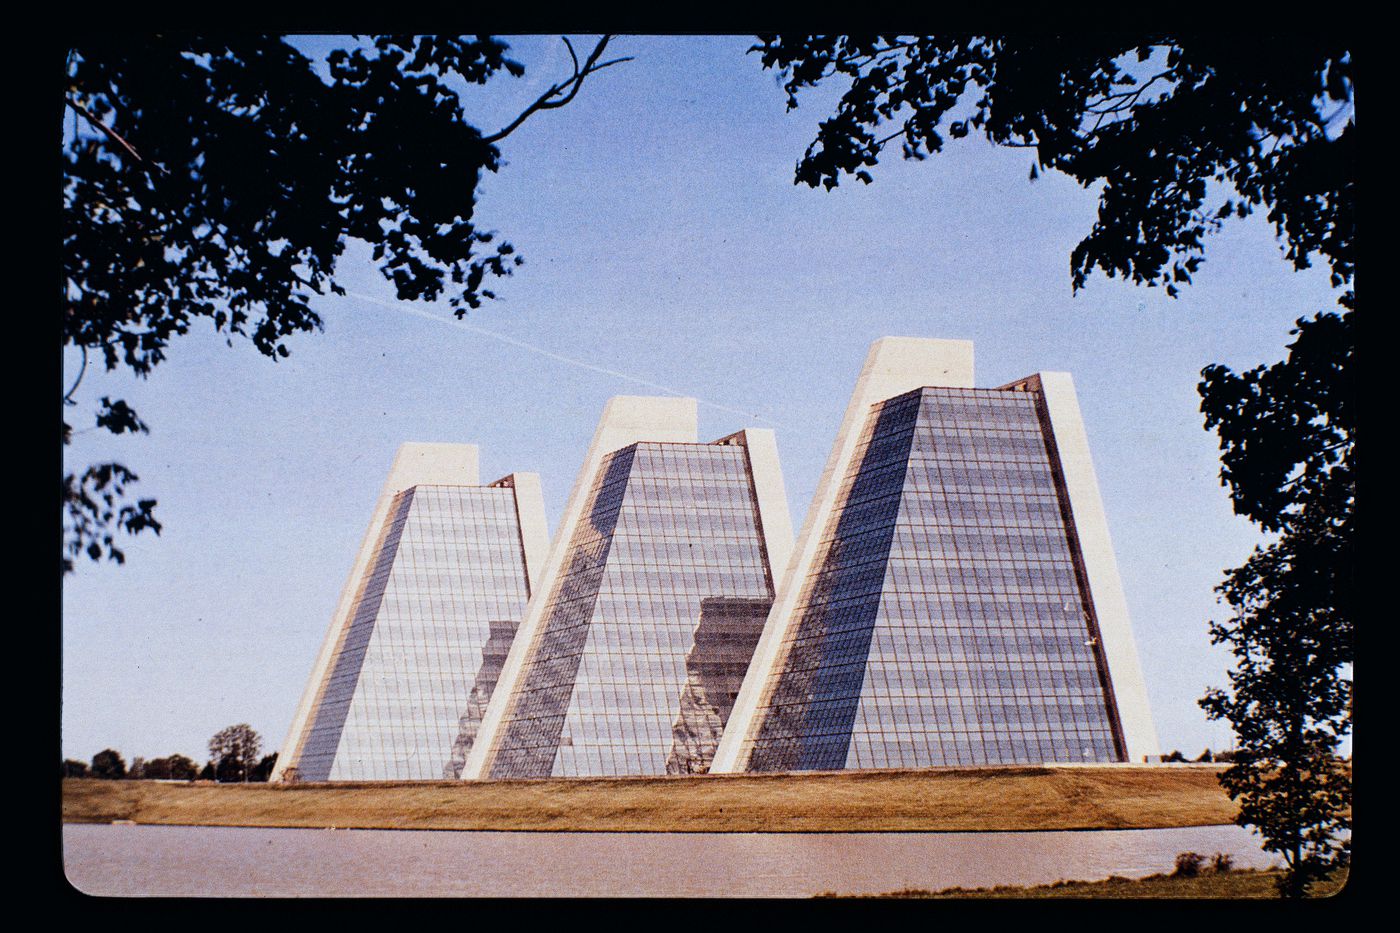 Slide of a photograph of College Life Insurance Building, Indianapolis, by Kevin Roche and John Dinkeloo